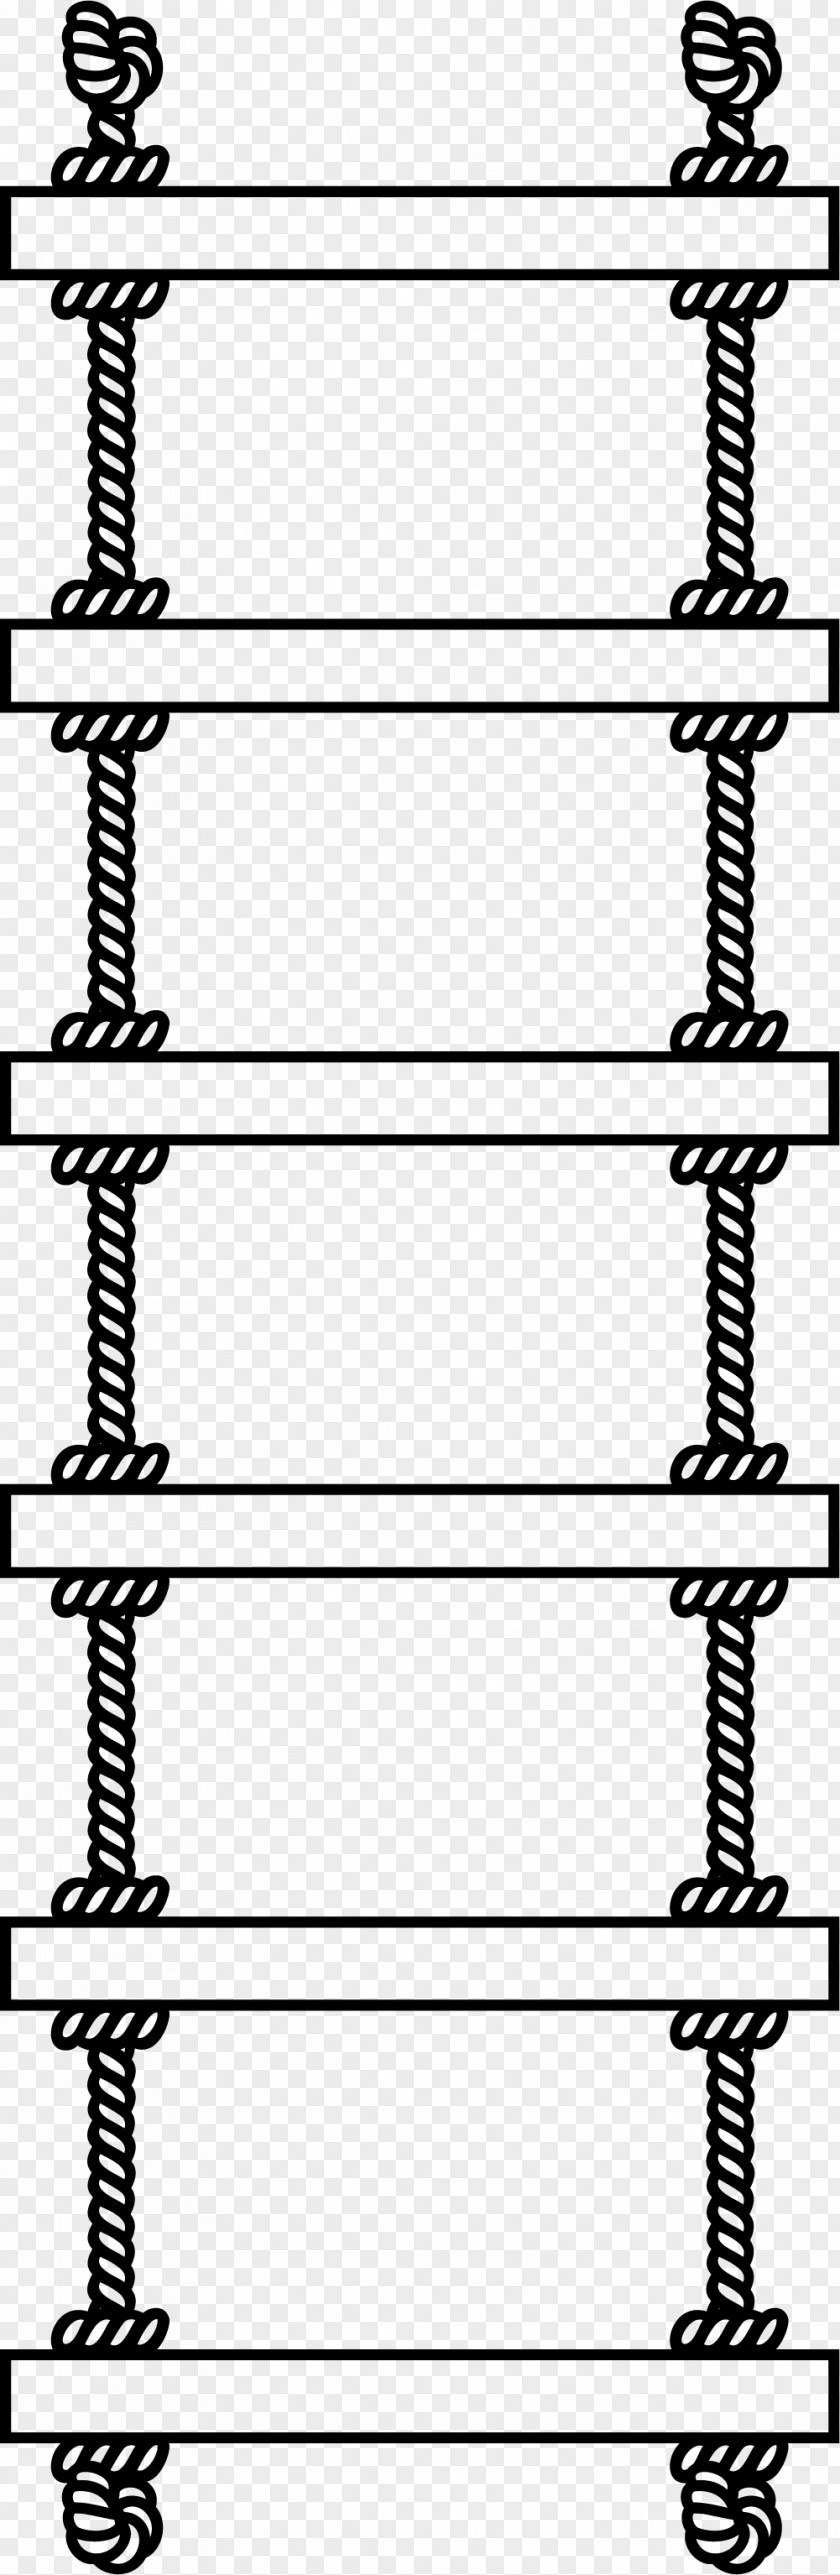 Jane, Straight Ladder Euclidean Vector Stairs PNG